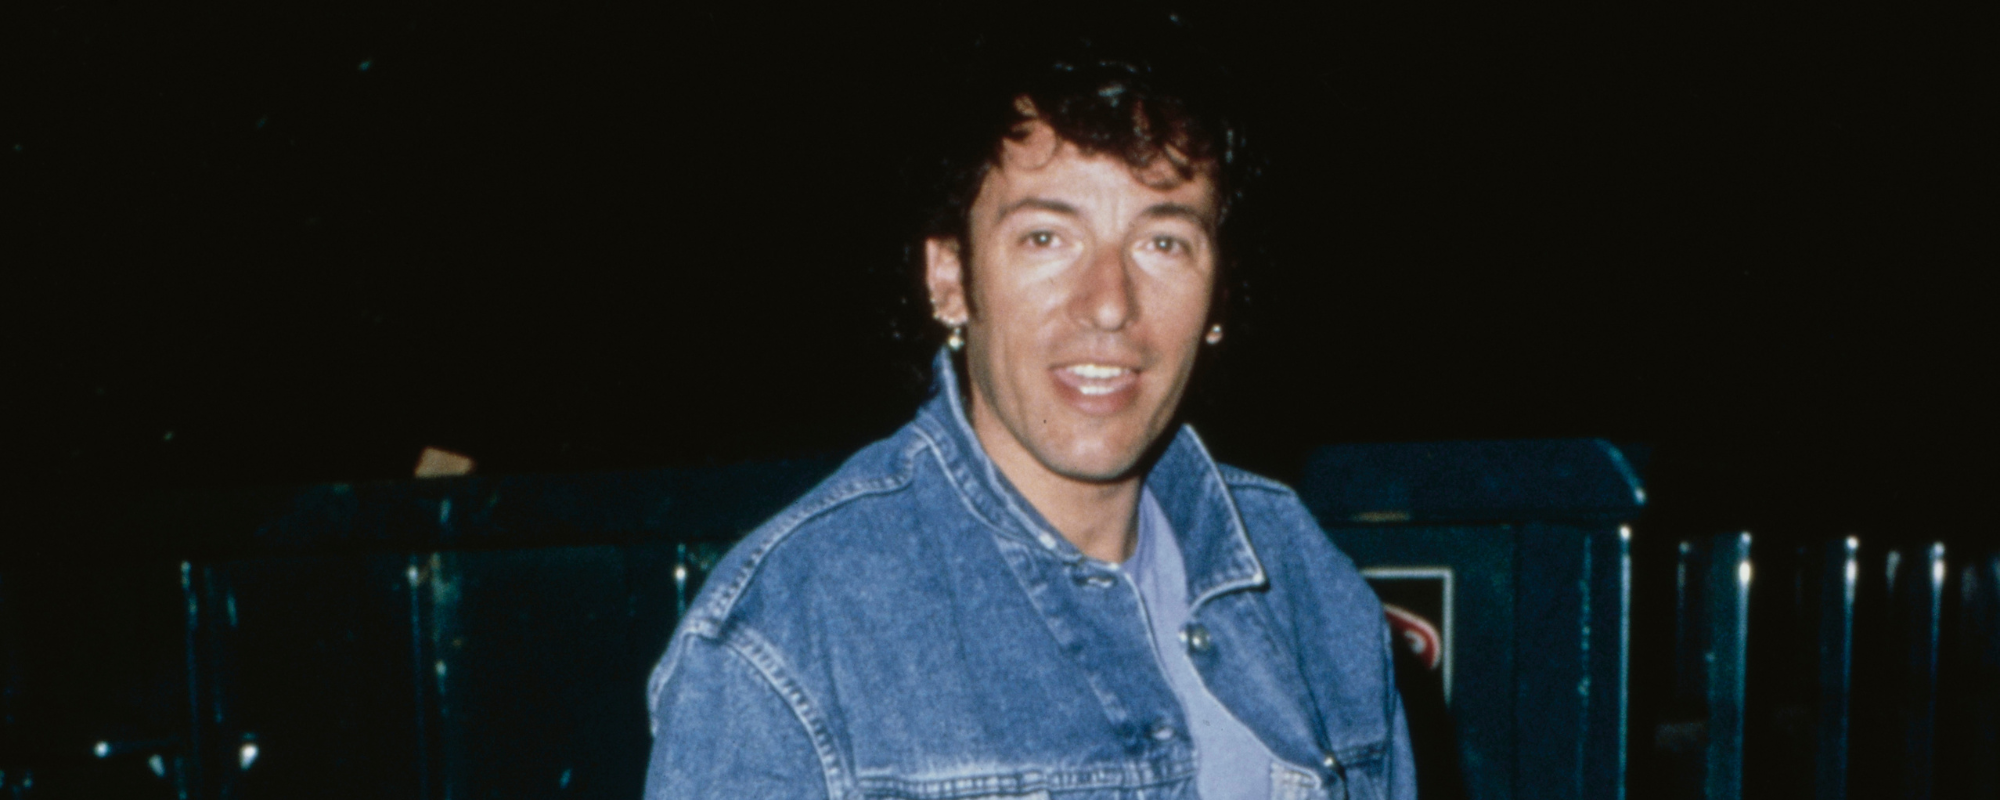 3 Rare Bruce Springsteen Songs You Need to Listen To